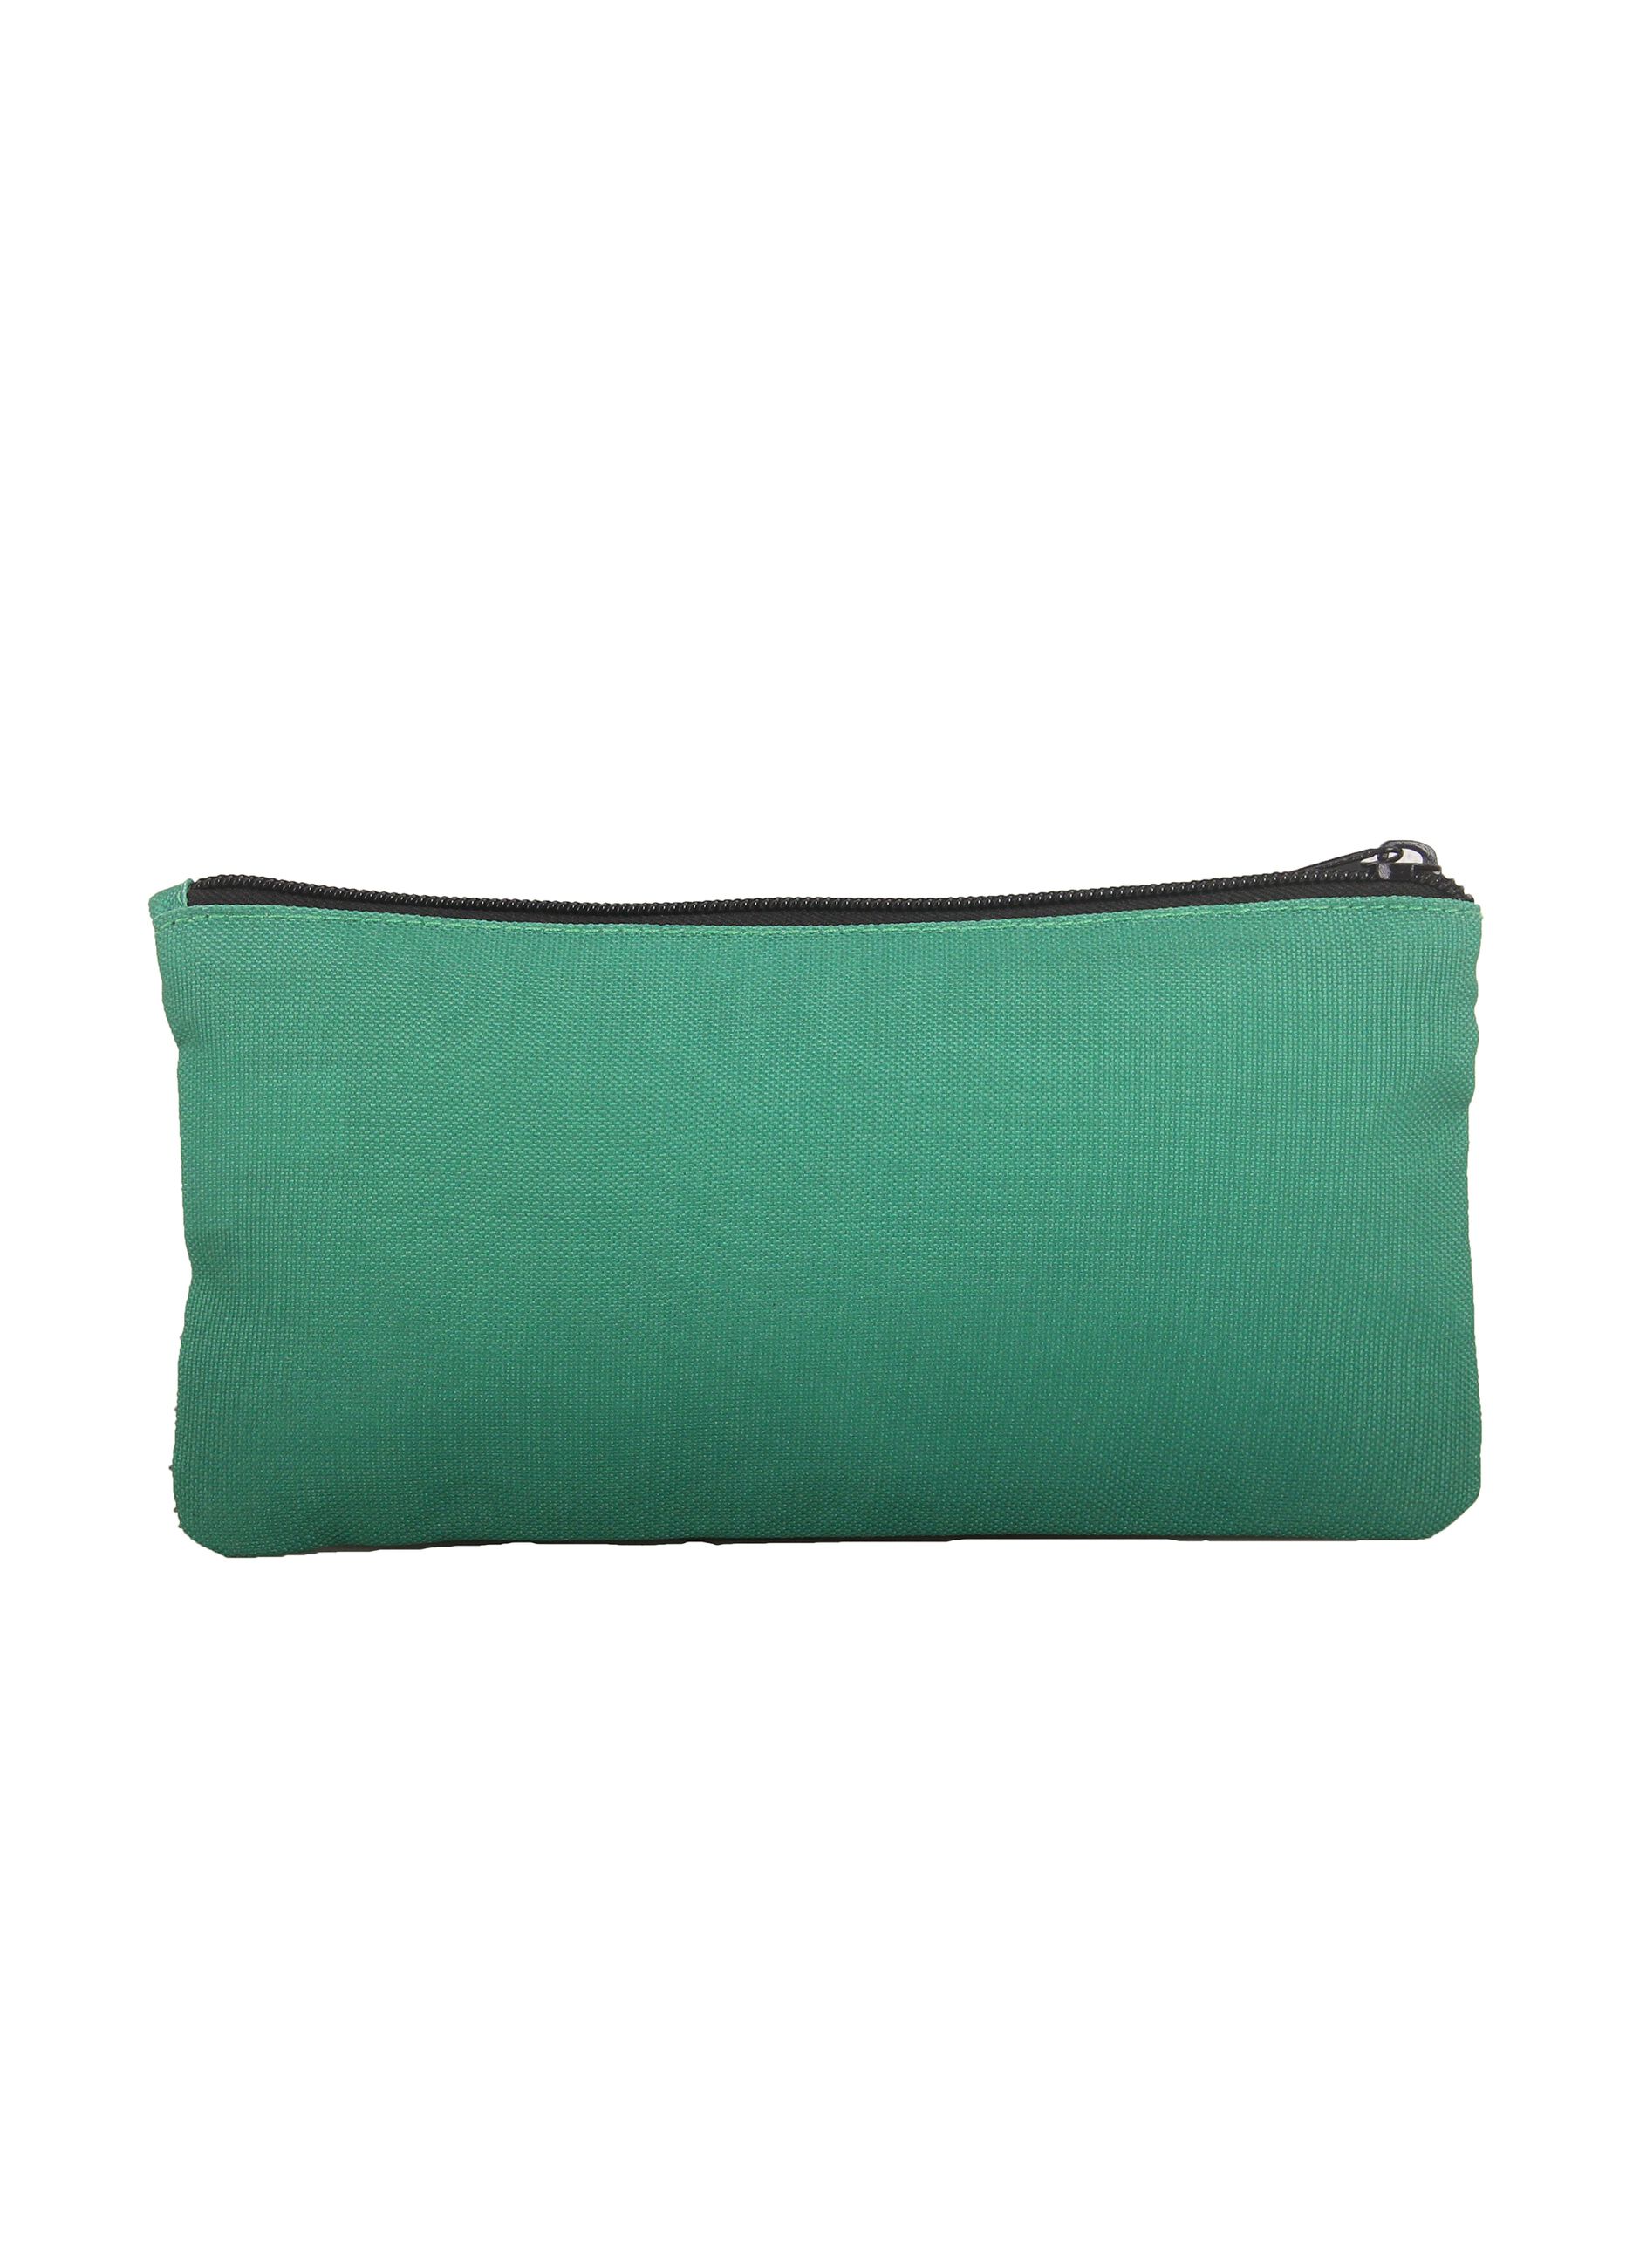 Pouch pencil case with zip